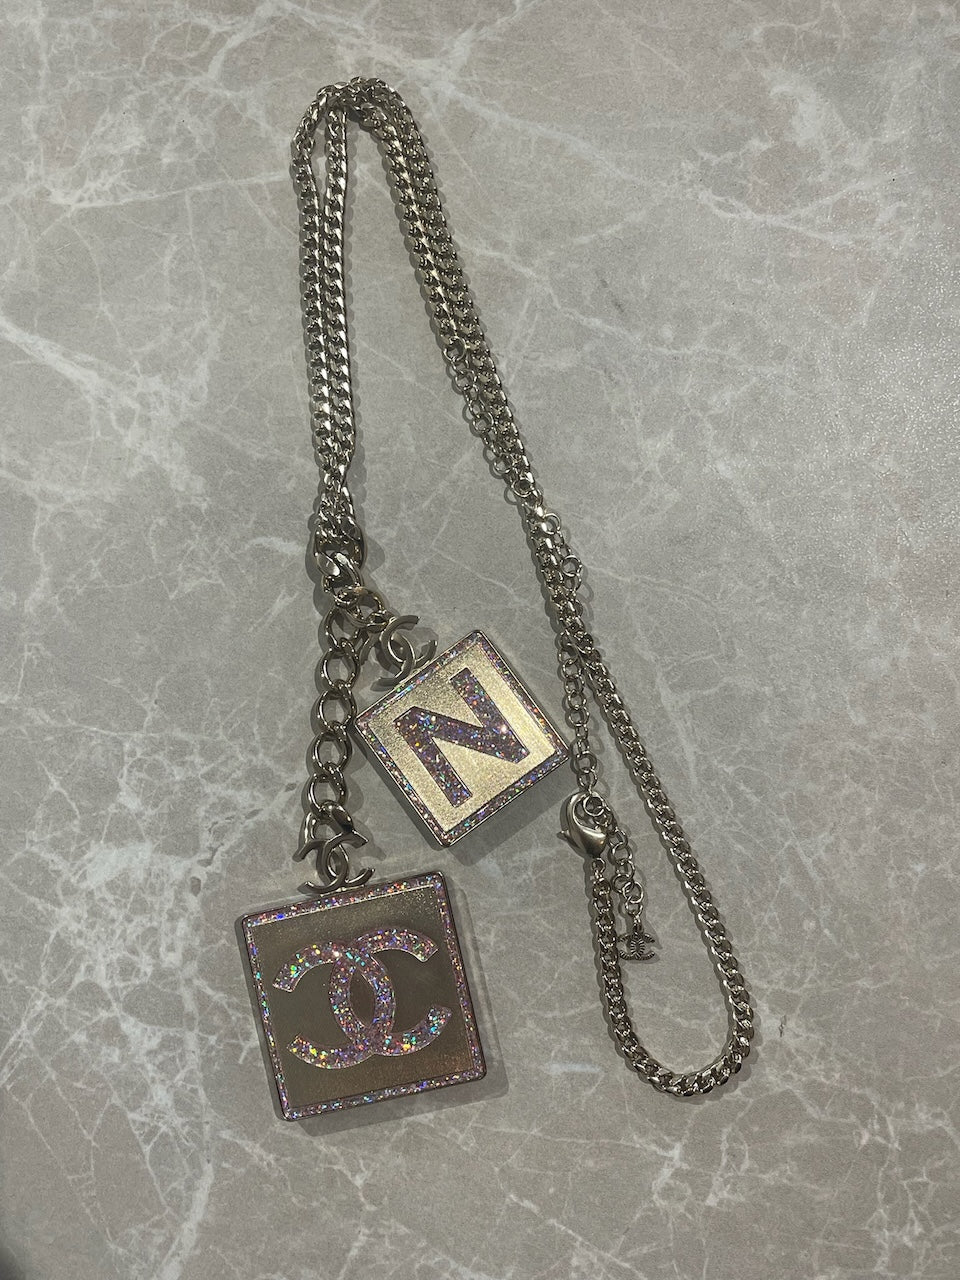 Collier Chanel n°5 NEUF